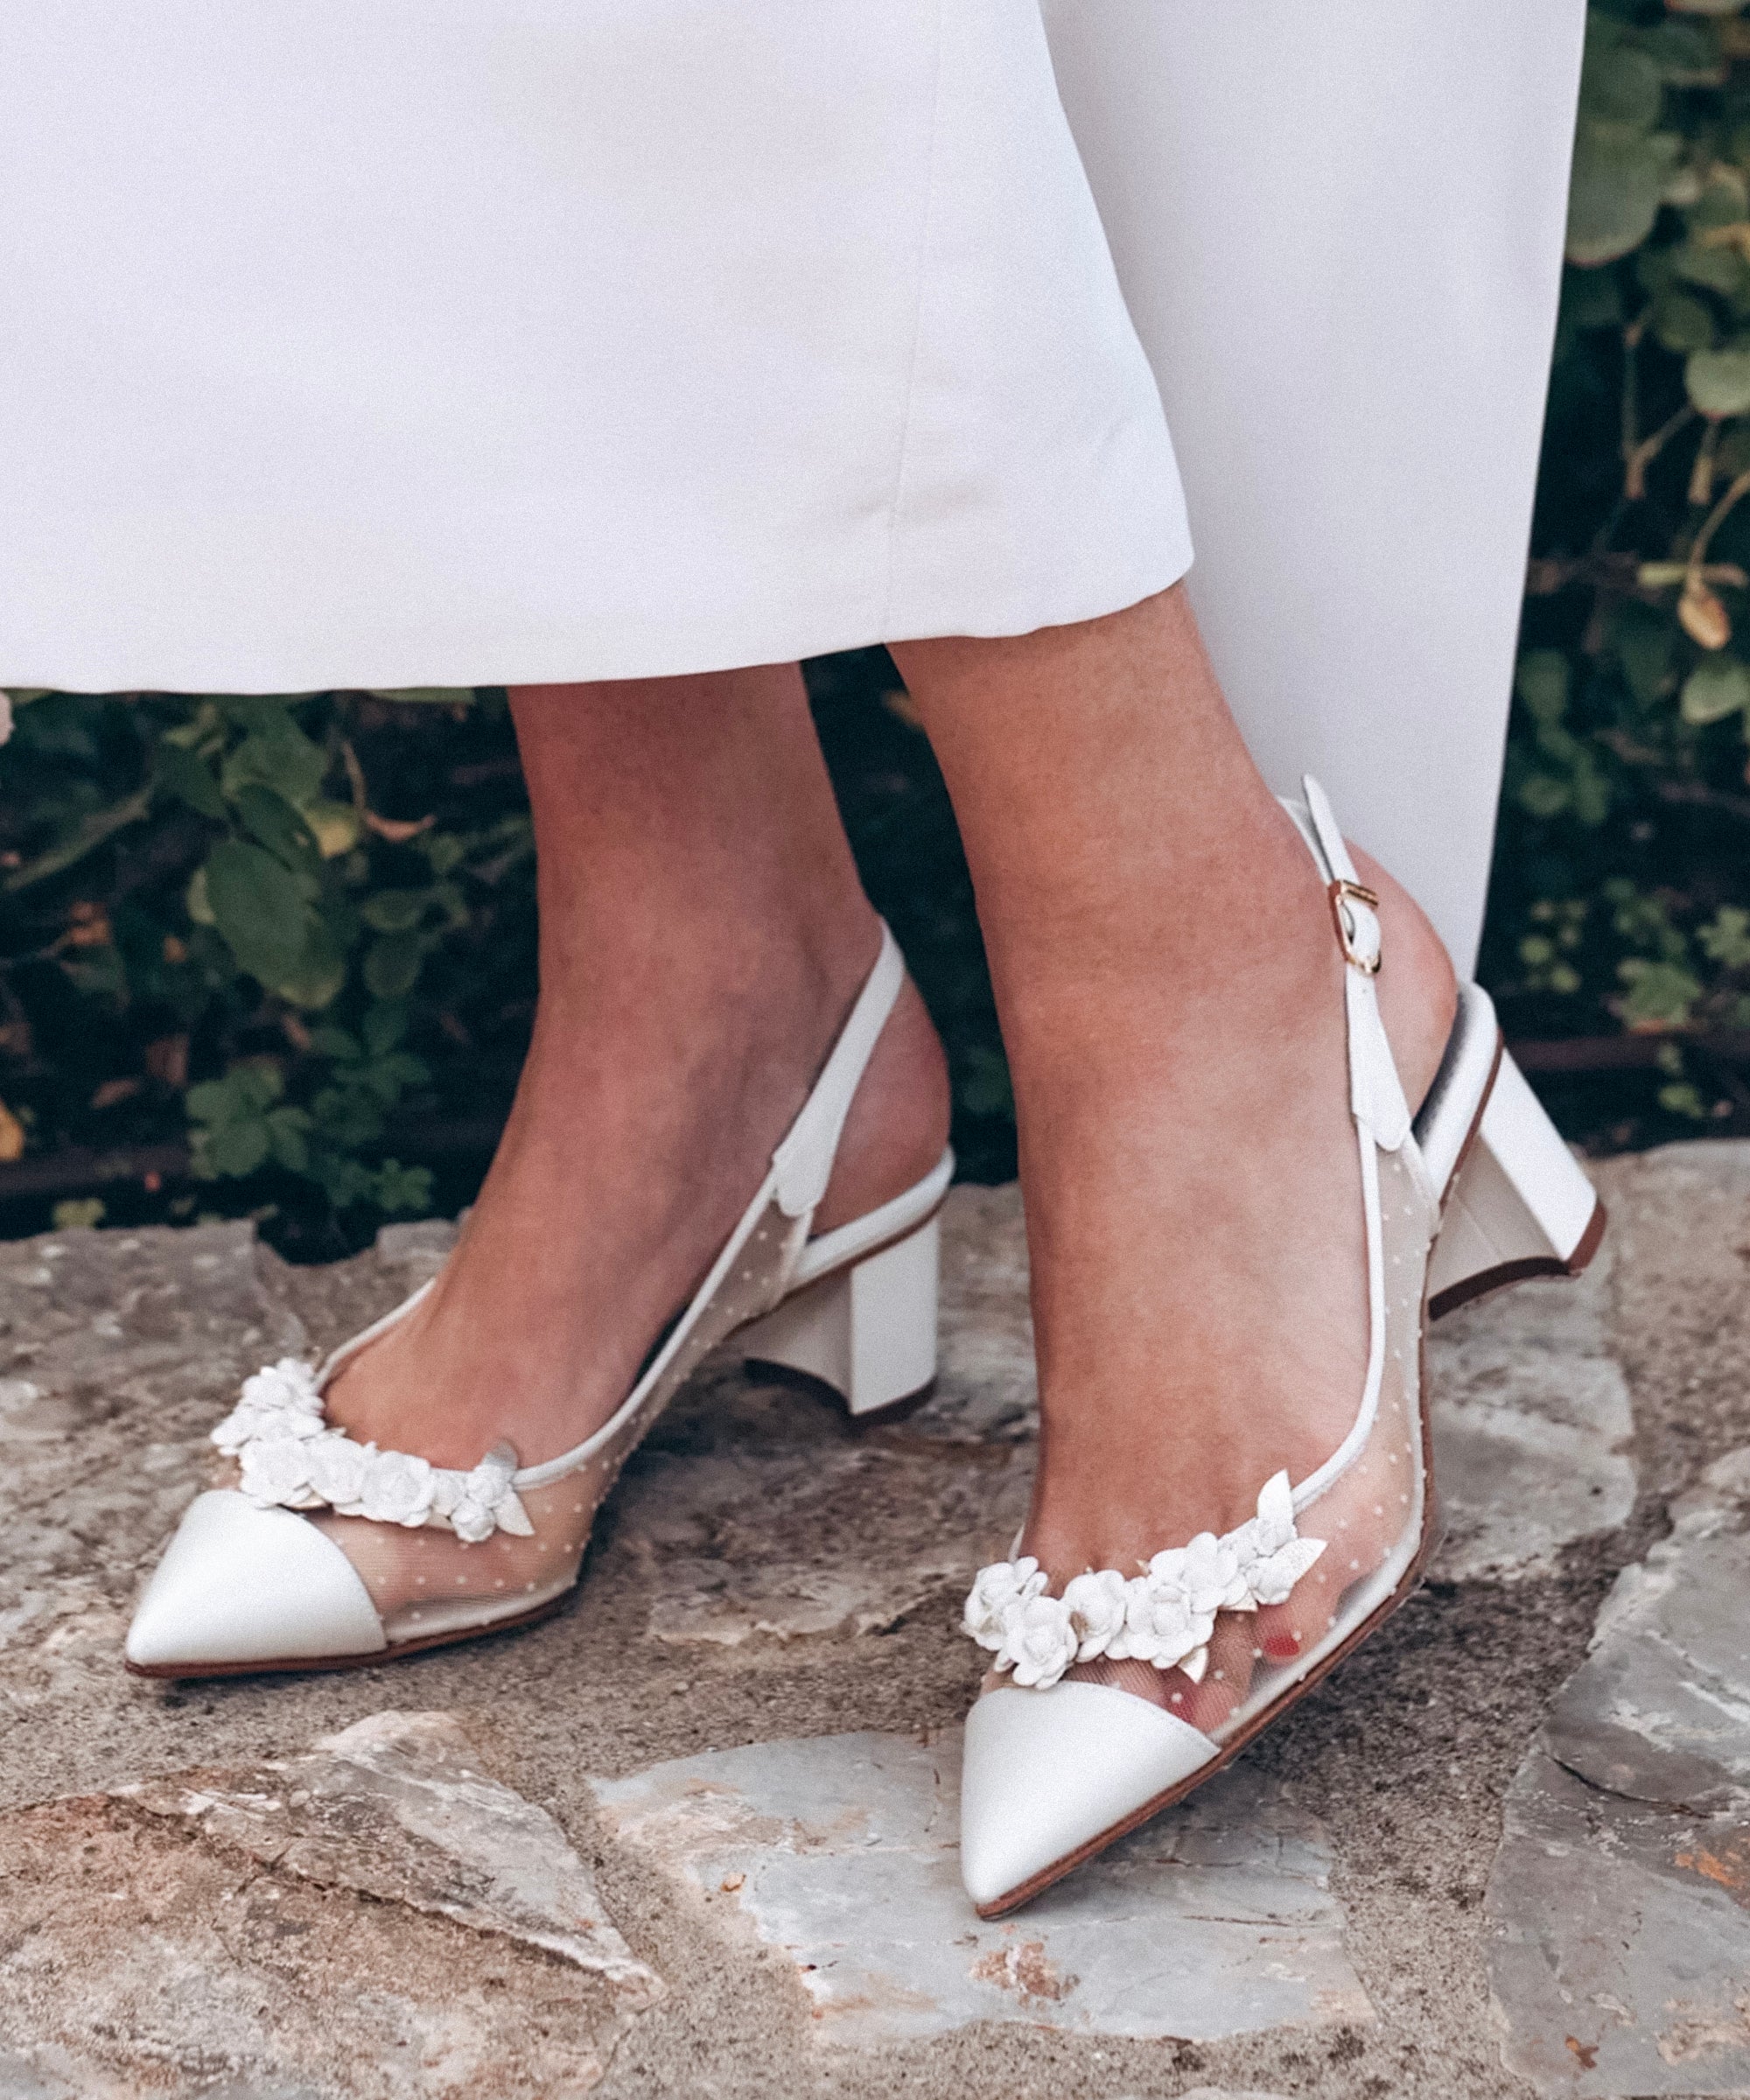 5 Most Comfortable Types of Heels Podiatrists Recommend